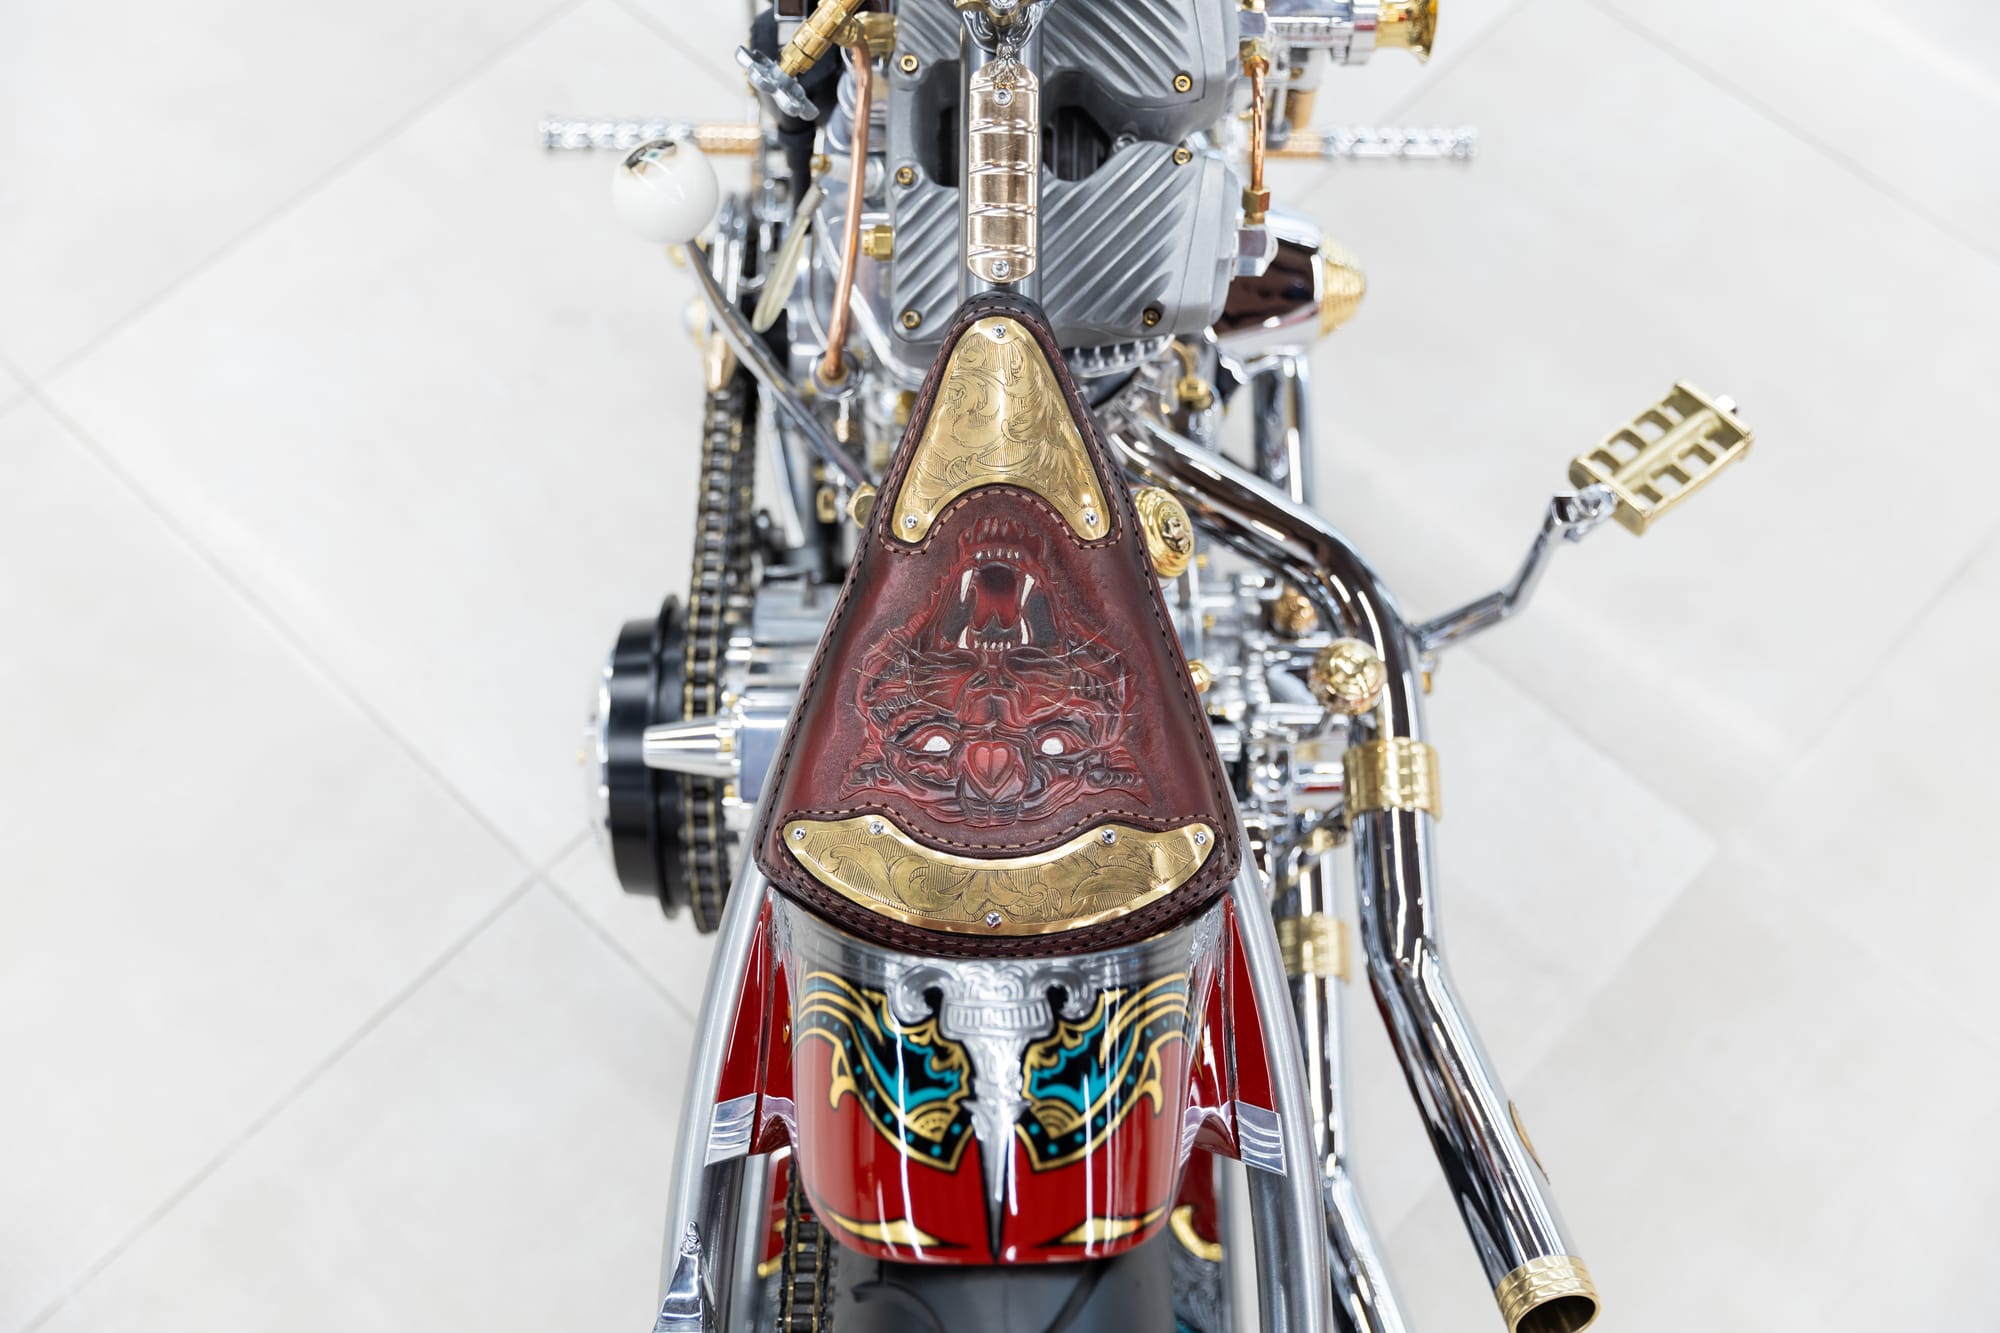 The Arabian Leopard Elevates Your Ride of Custom Motorcycle Excellence